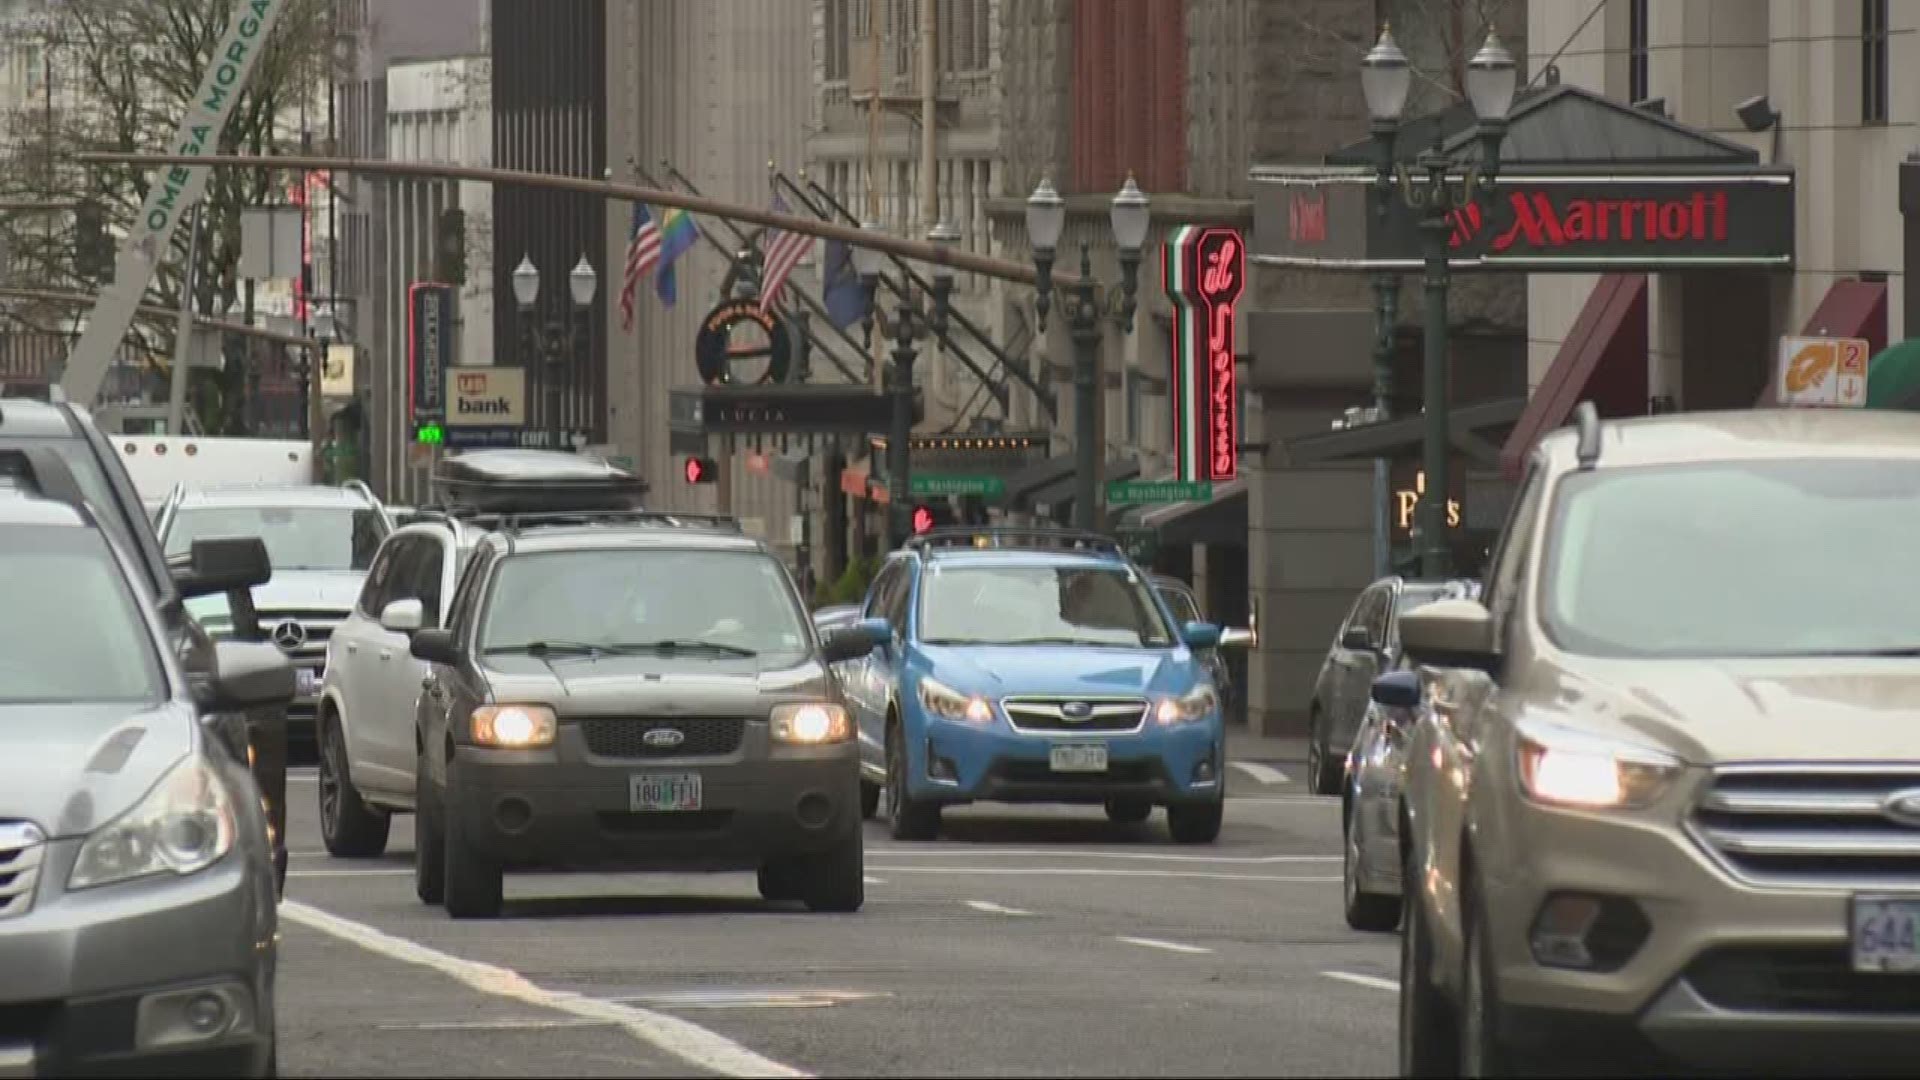 Deals for shoppers. A look at how downtown businesses are trying to entice shoppers this holiday season.